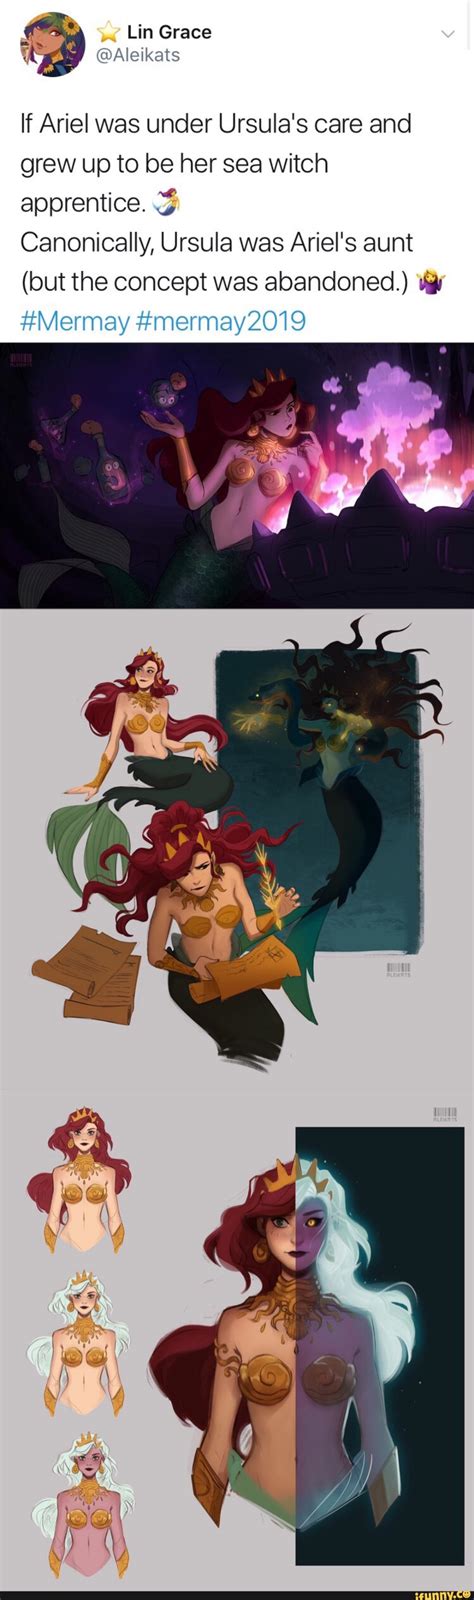 If Ariel Was Under Ursulas Care And Grew Up To Be Her Sea Witch